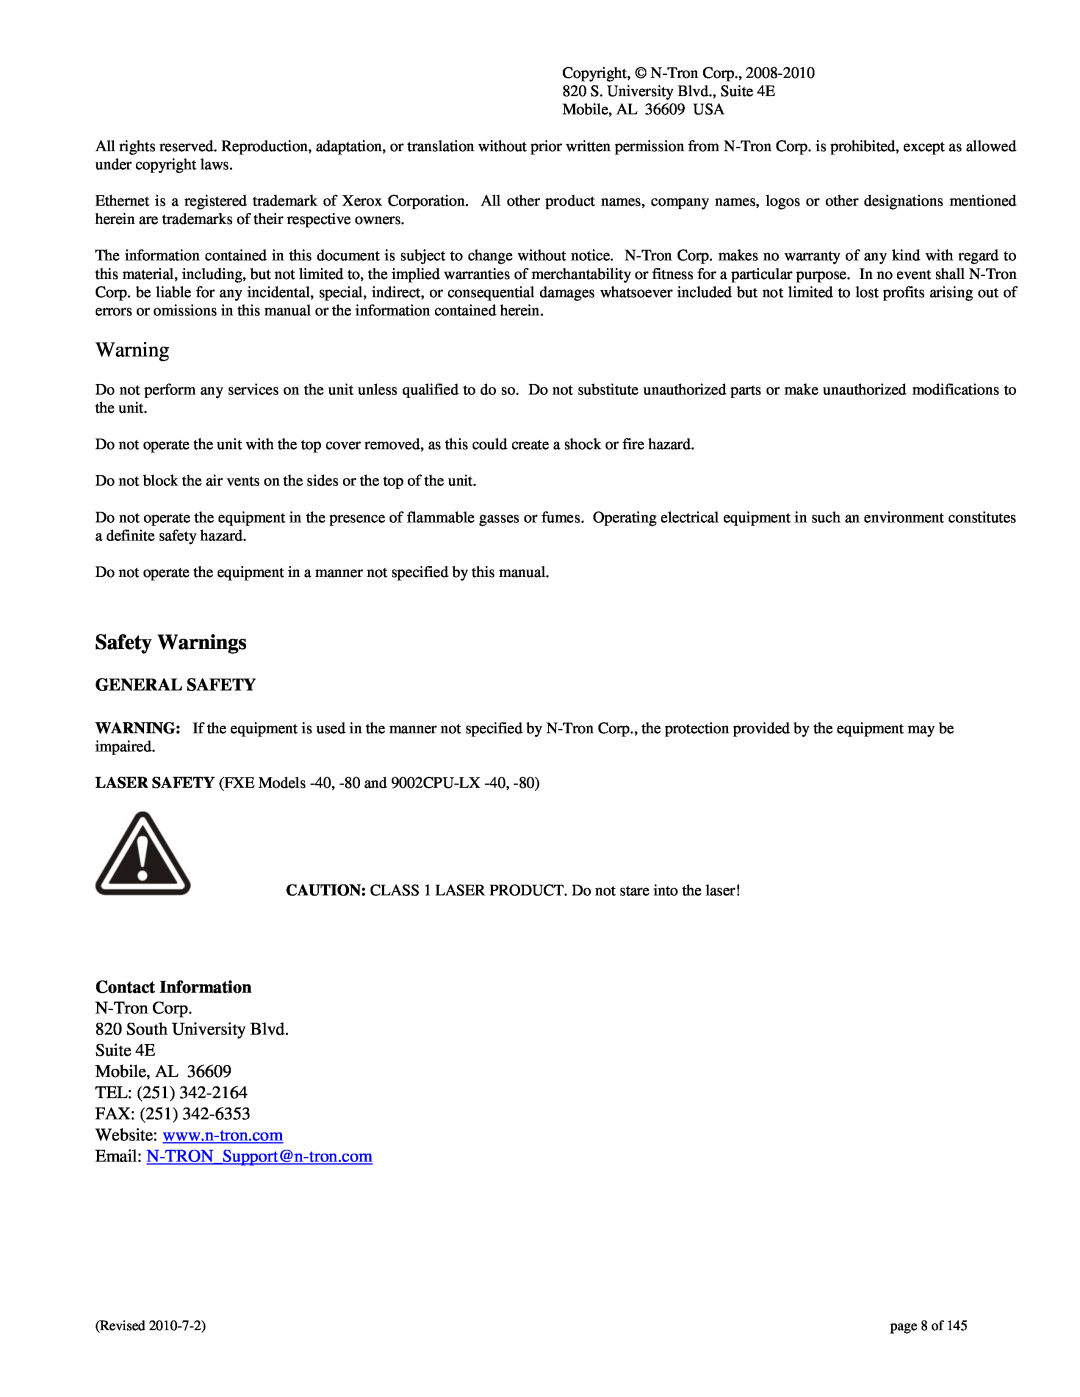 N-Tron 9000 user manual Safety Warnings, General Safety, Contact Information, Email N-TRONSupport@n-tron.com 